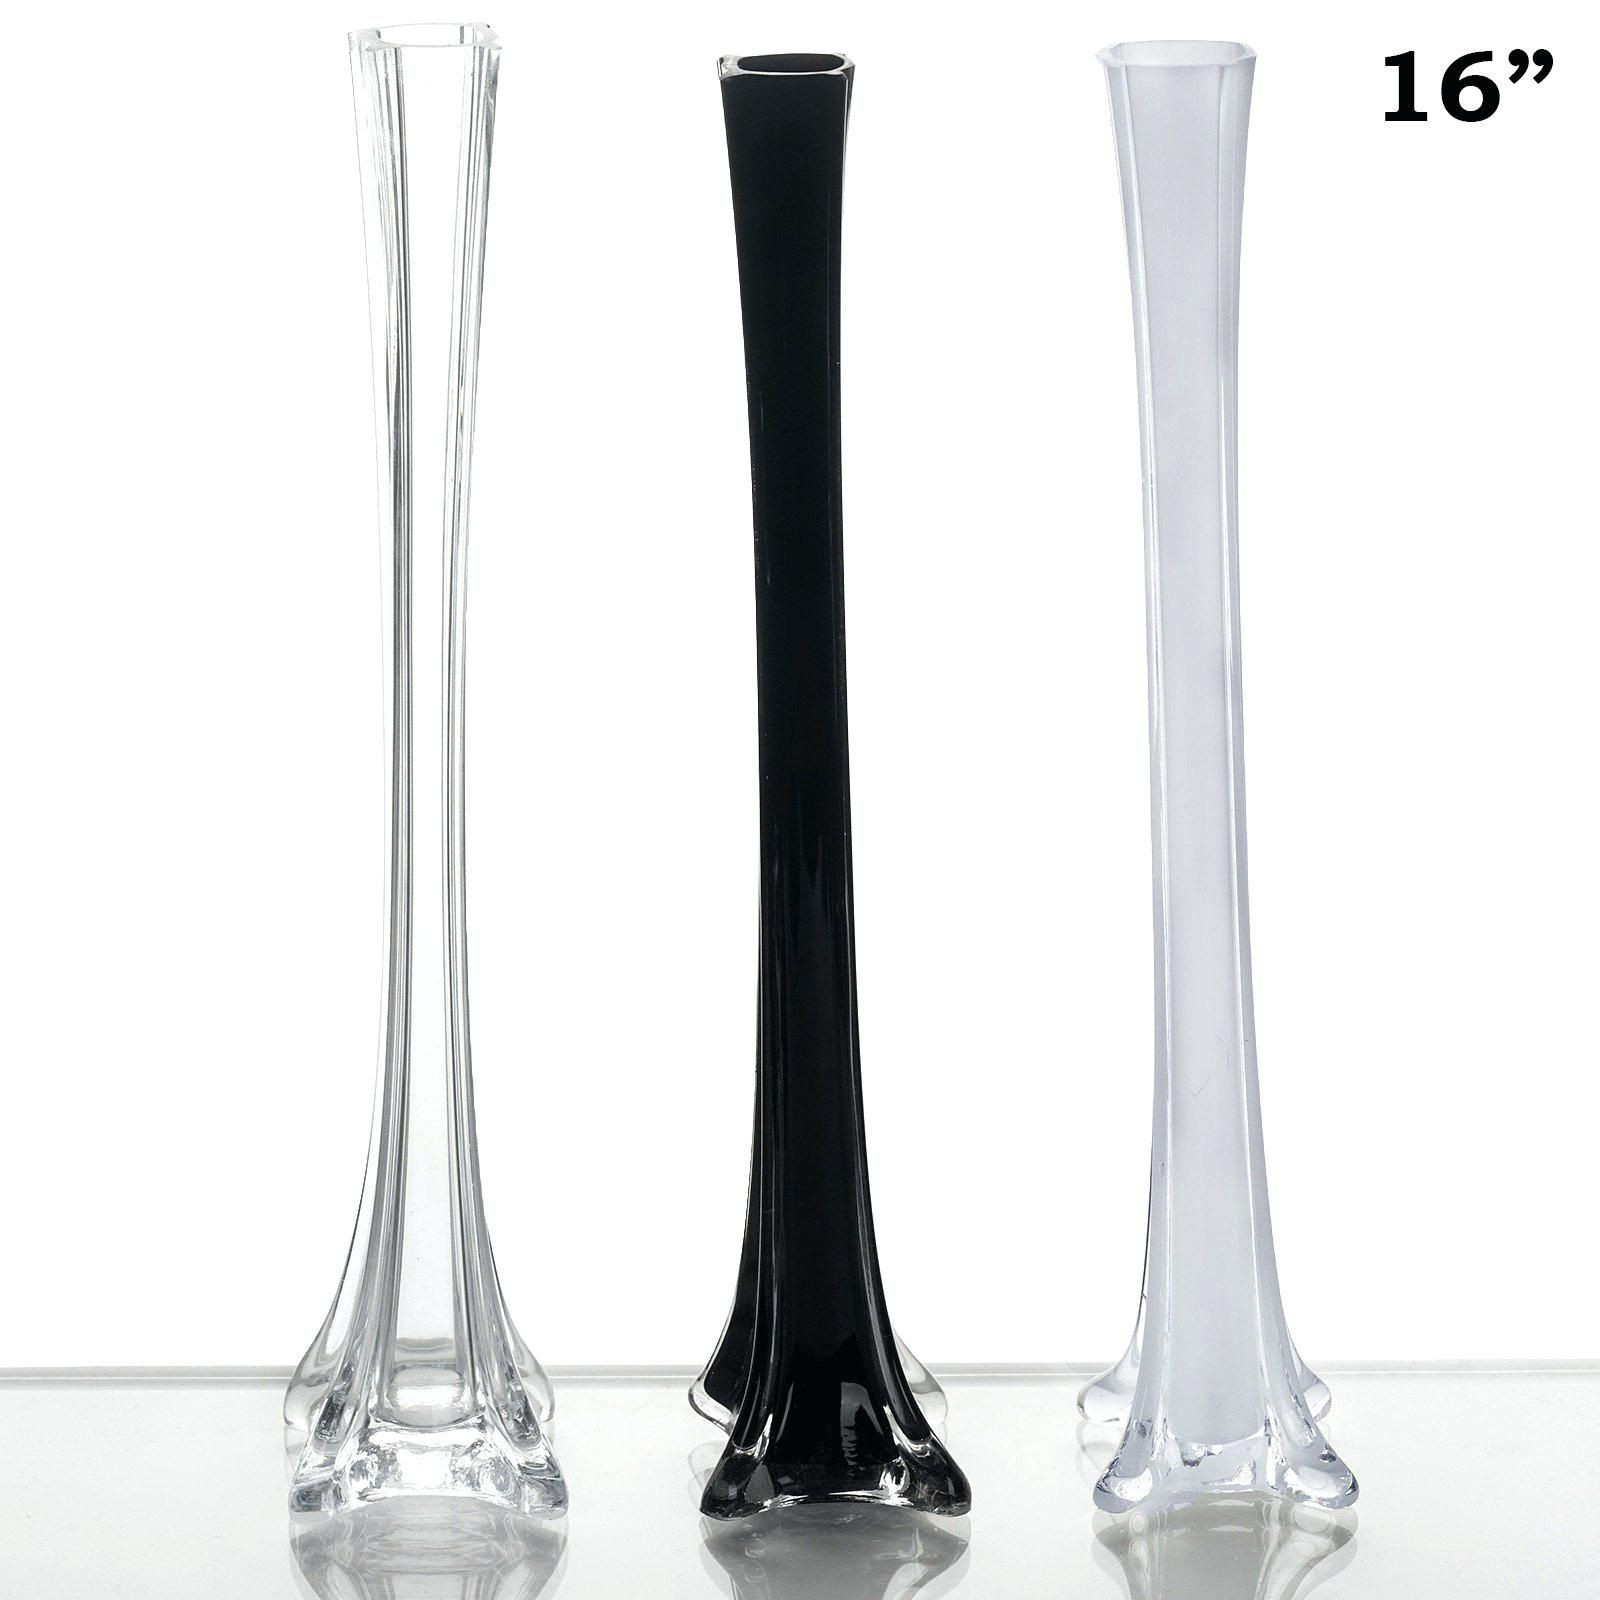 27 attractive Eiffel tower Vases wholesale 2024 free download eiffel tower vases wholesale of 40 glass vases bulk the weekly world inside gallery plastic eiffel tower vases wholesale drawings art gallery